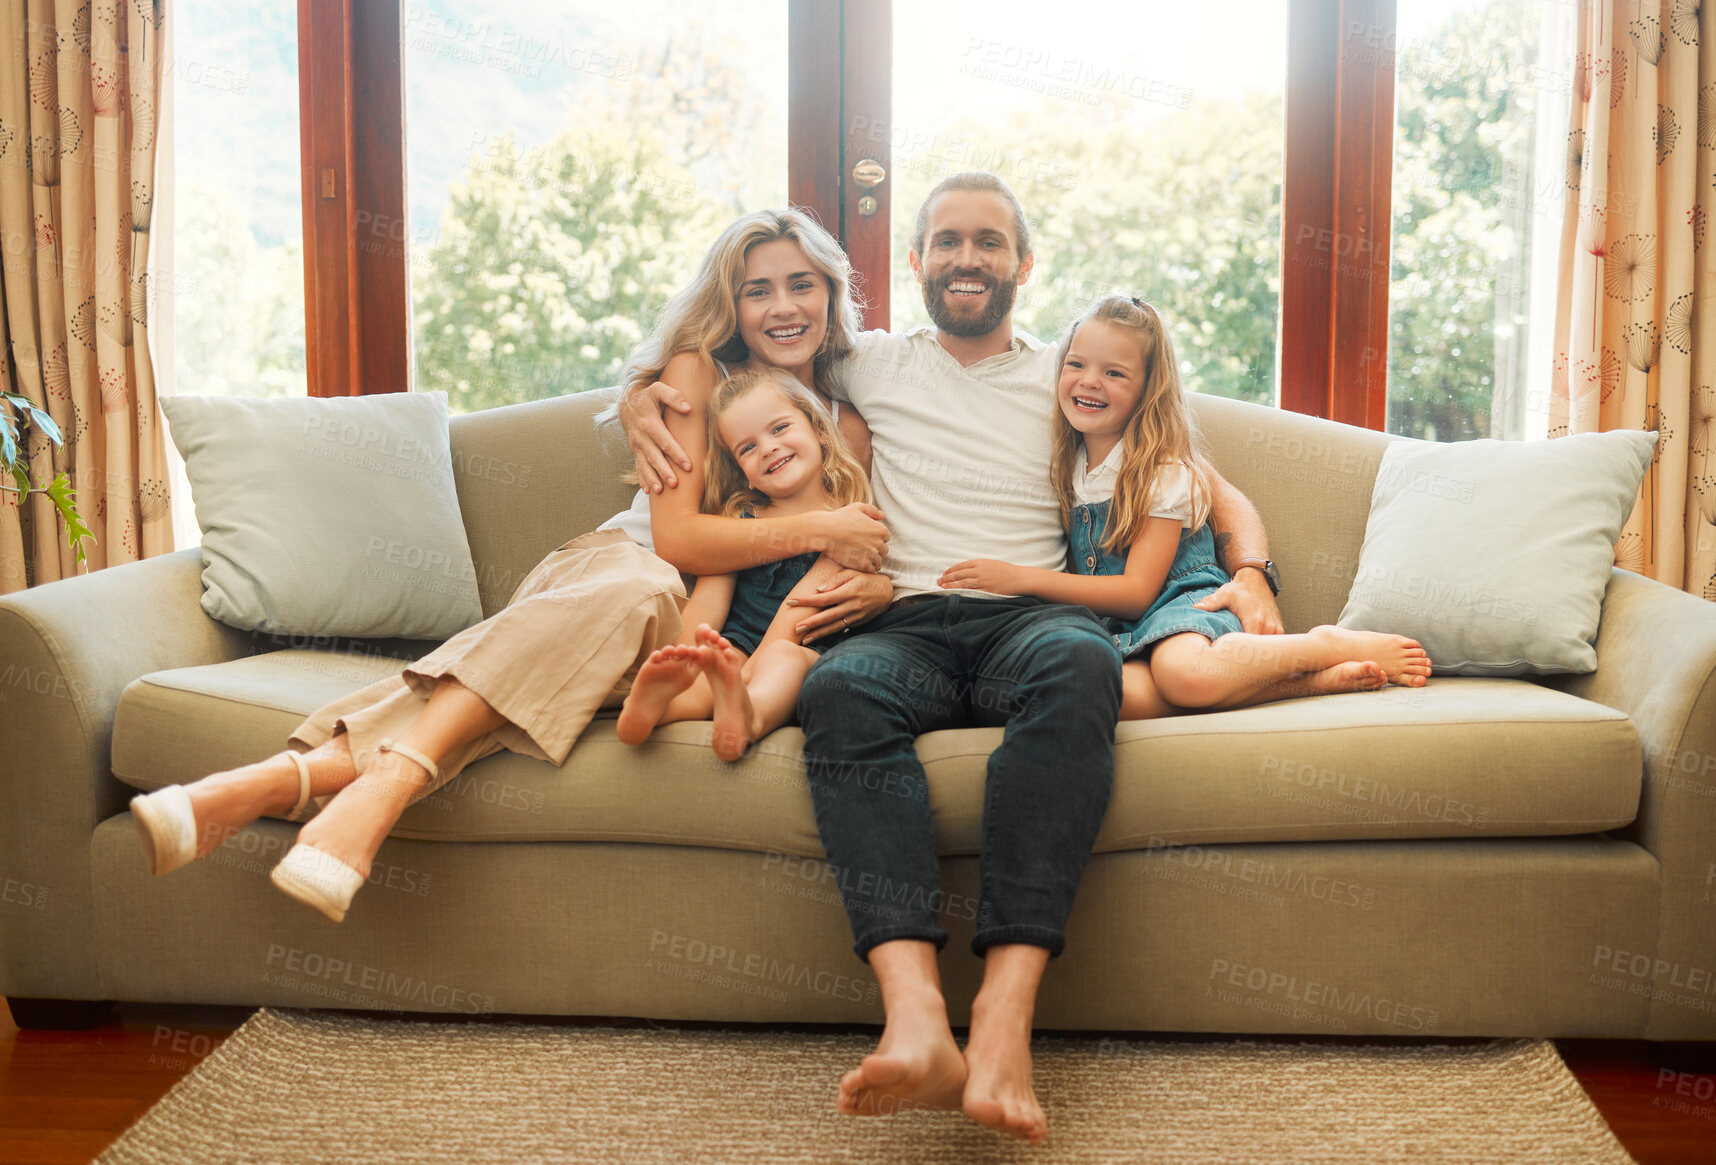 Buy stock photo Young happy content caucasian family holding a cardboard as a roof covering them sitting on the floor at home. Cheerful little girls bonding with their mother and father. Loving parents spending time with their children